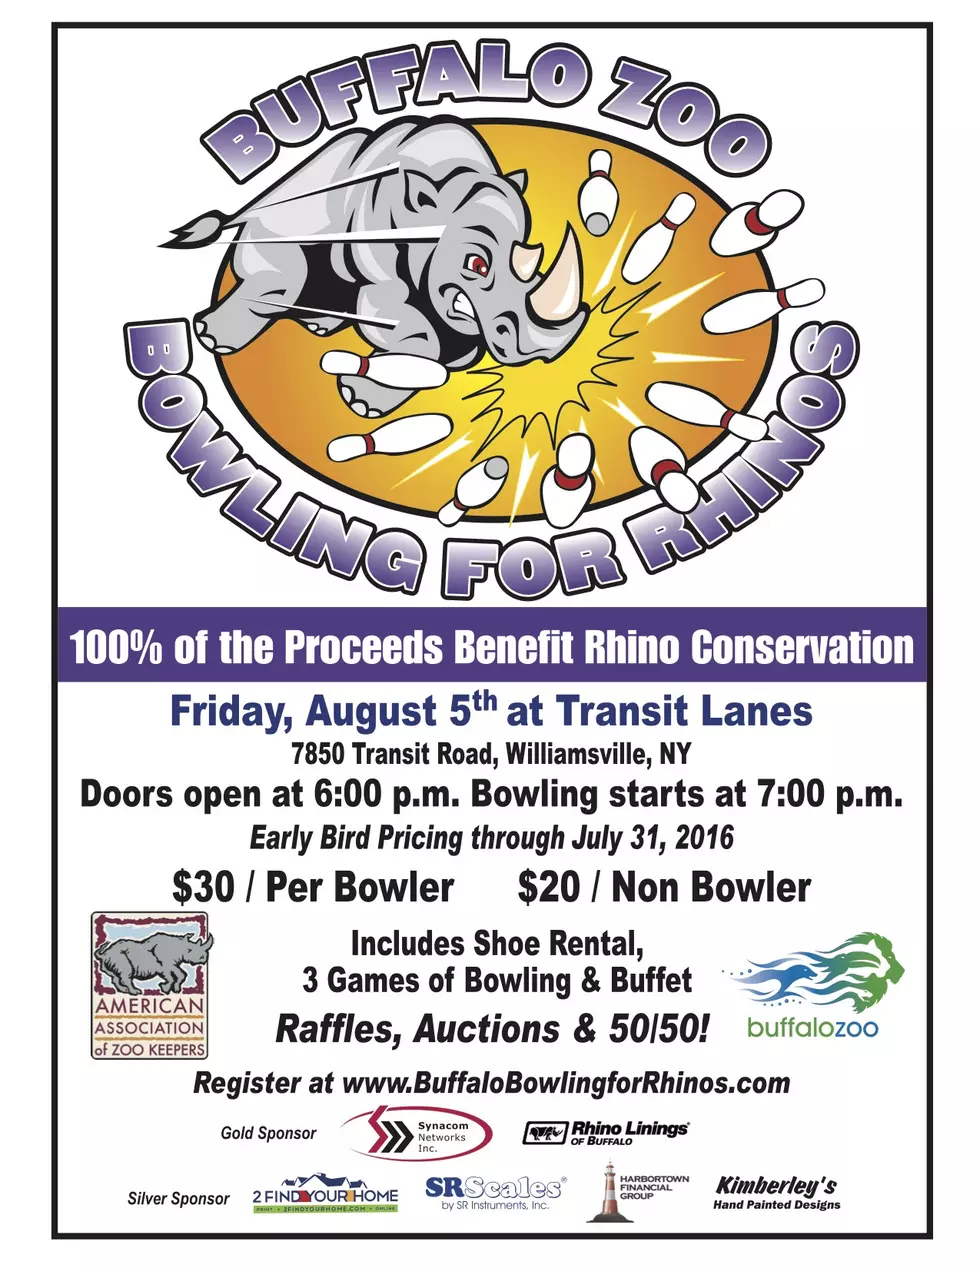 Bowling for Rhinos Is Coming Up for The Buffalo Zoo